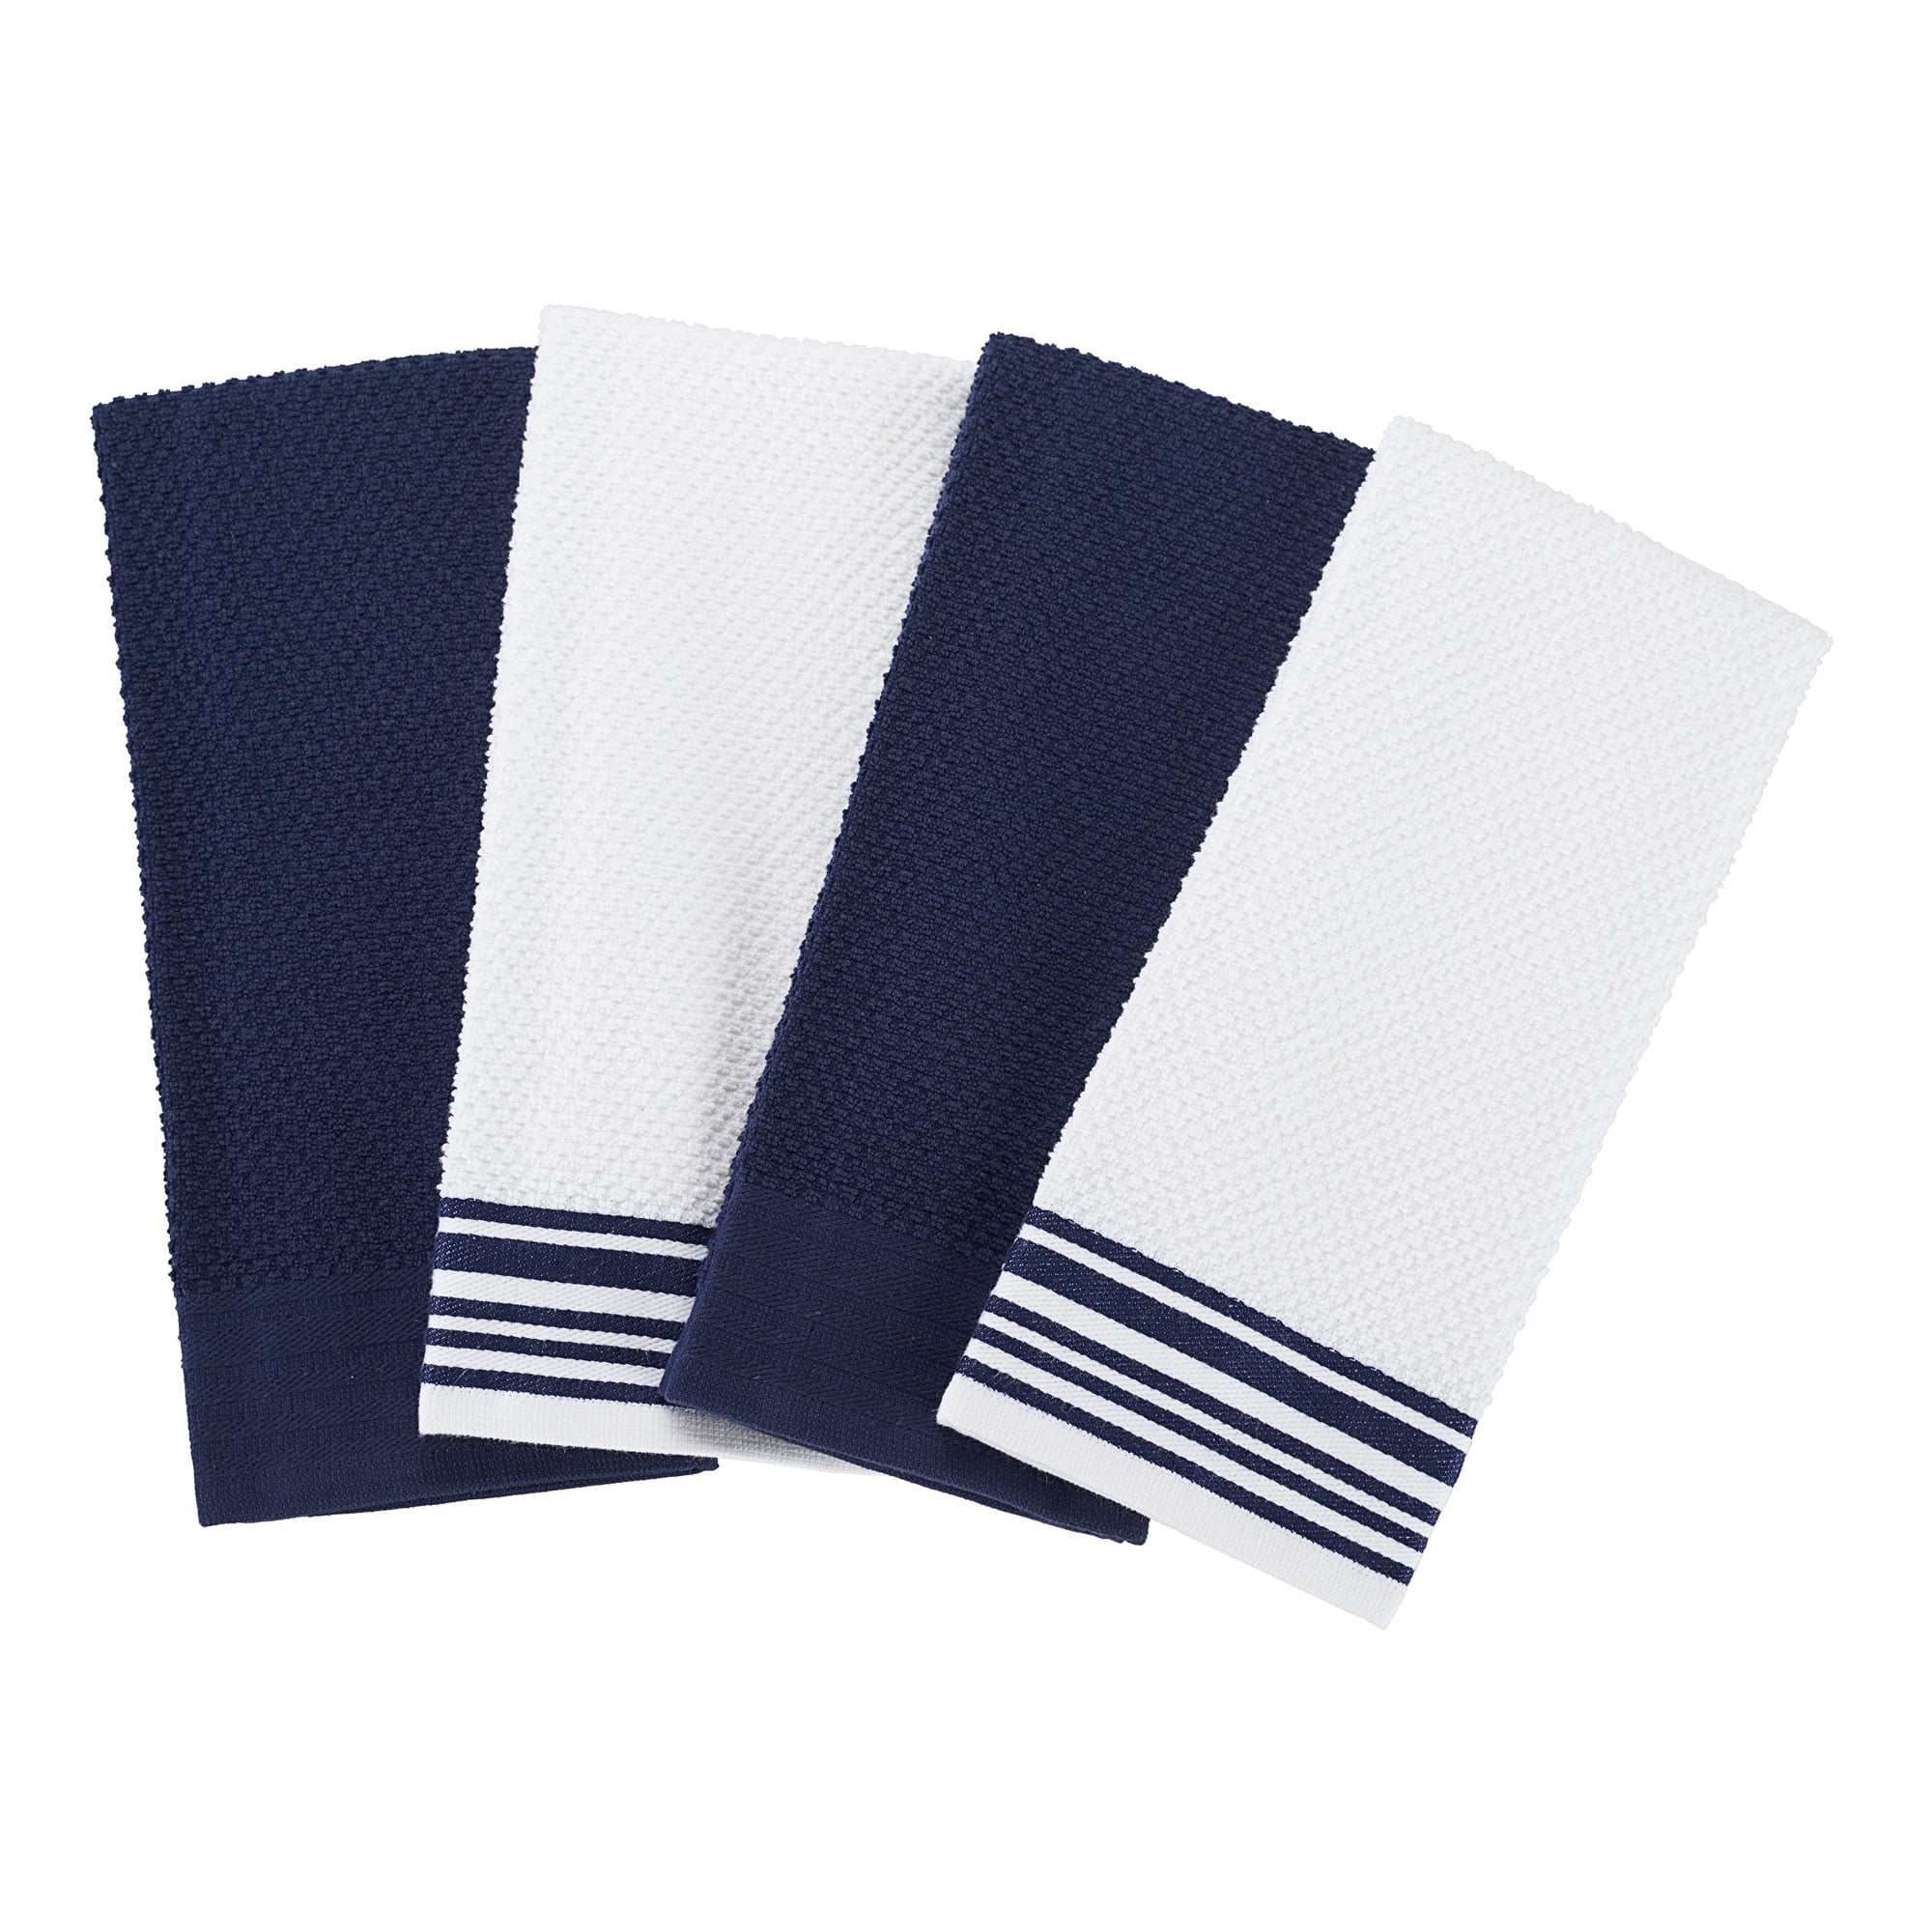 Mainstays 4-Pack 16x26 Woven Kitchen Towel Set, Navy